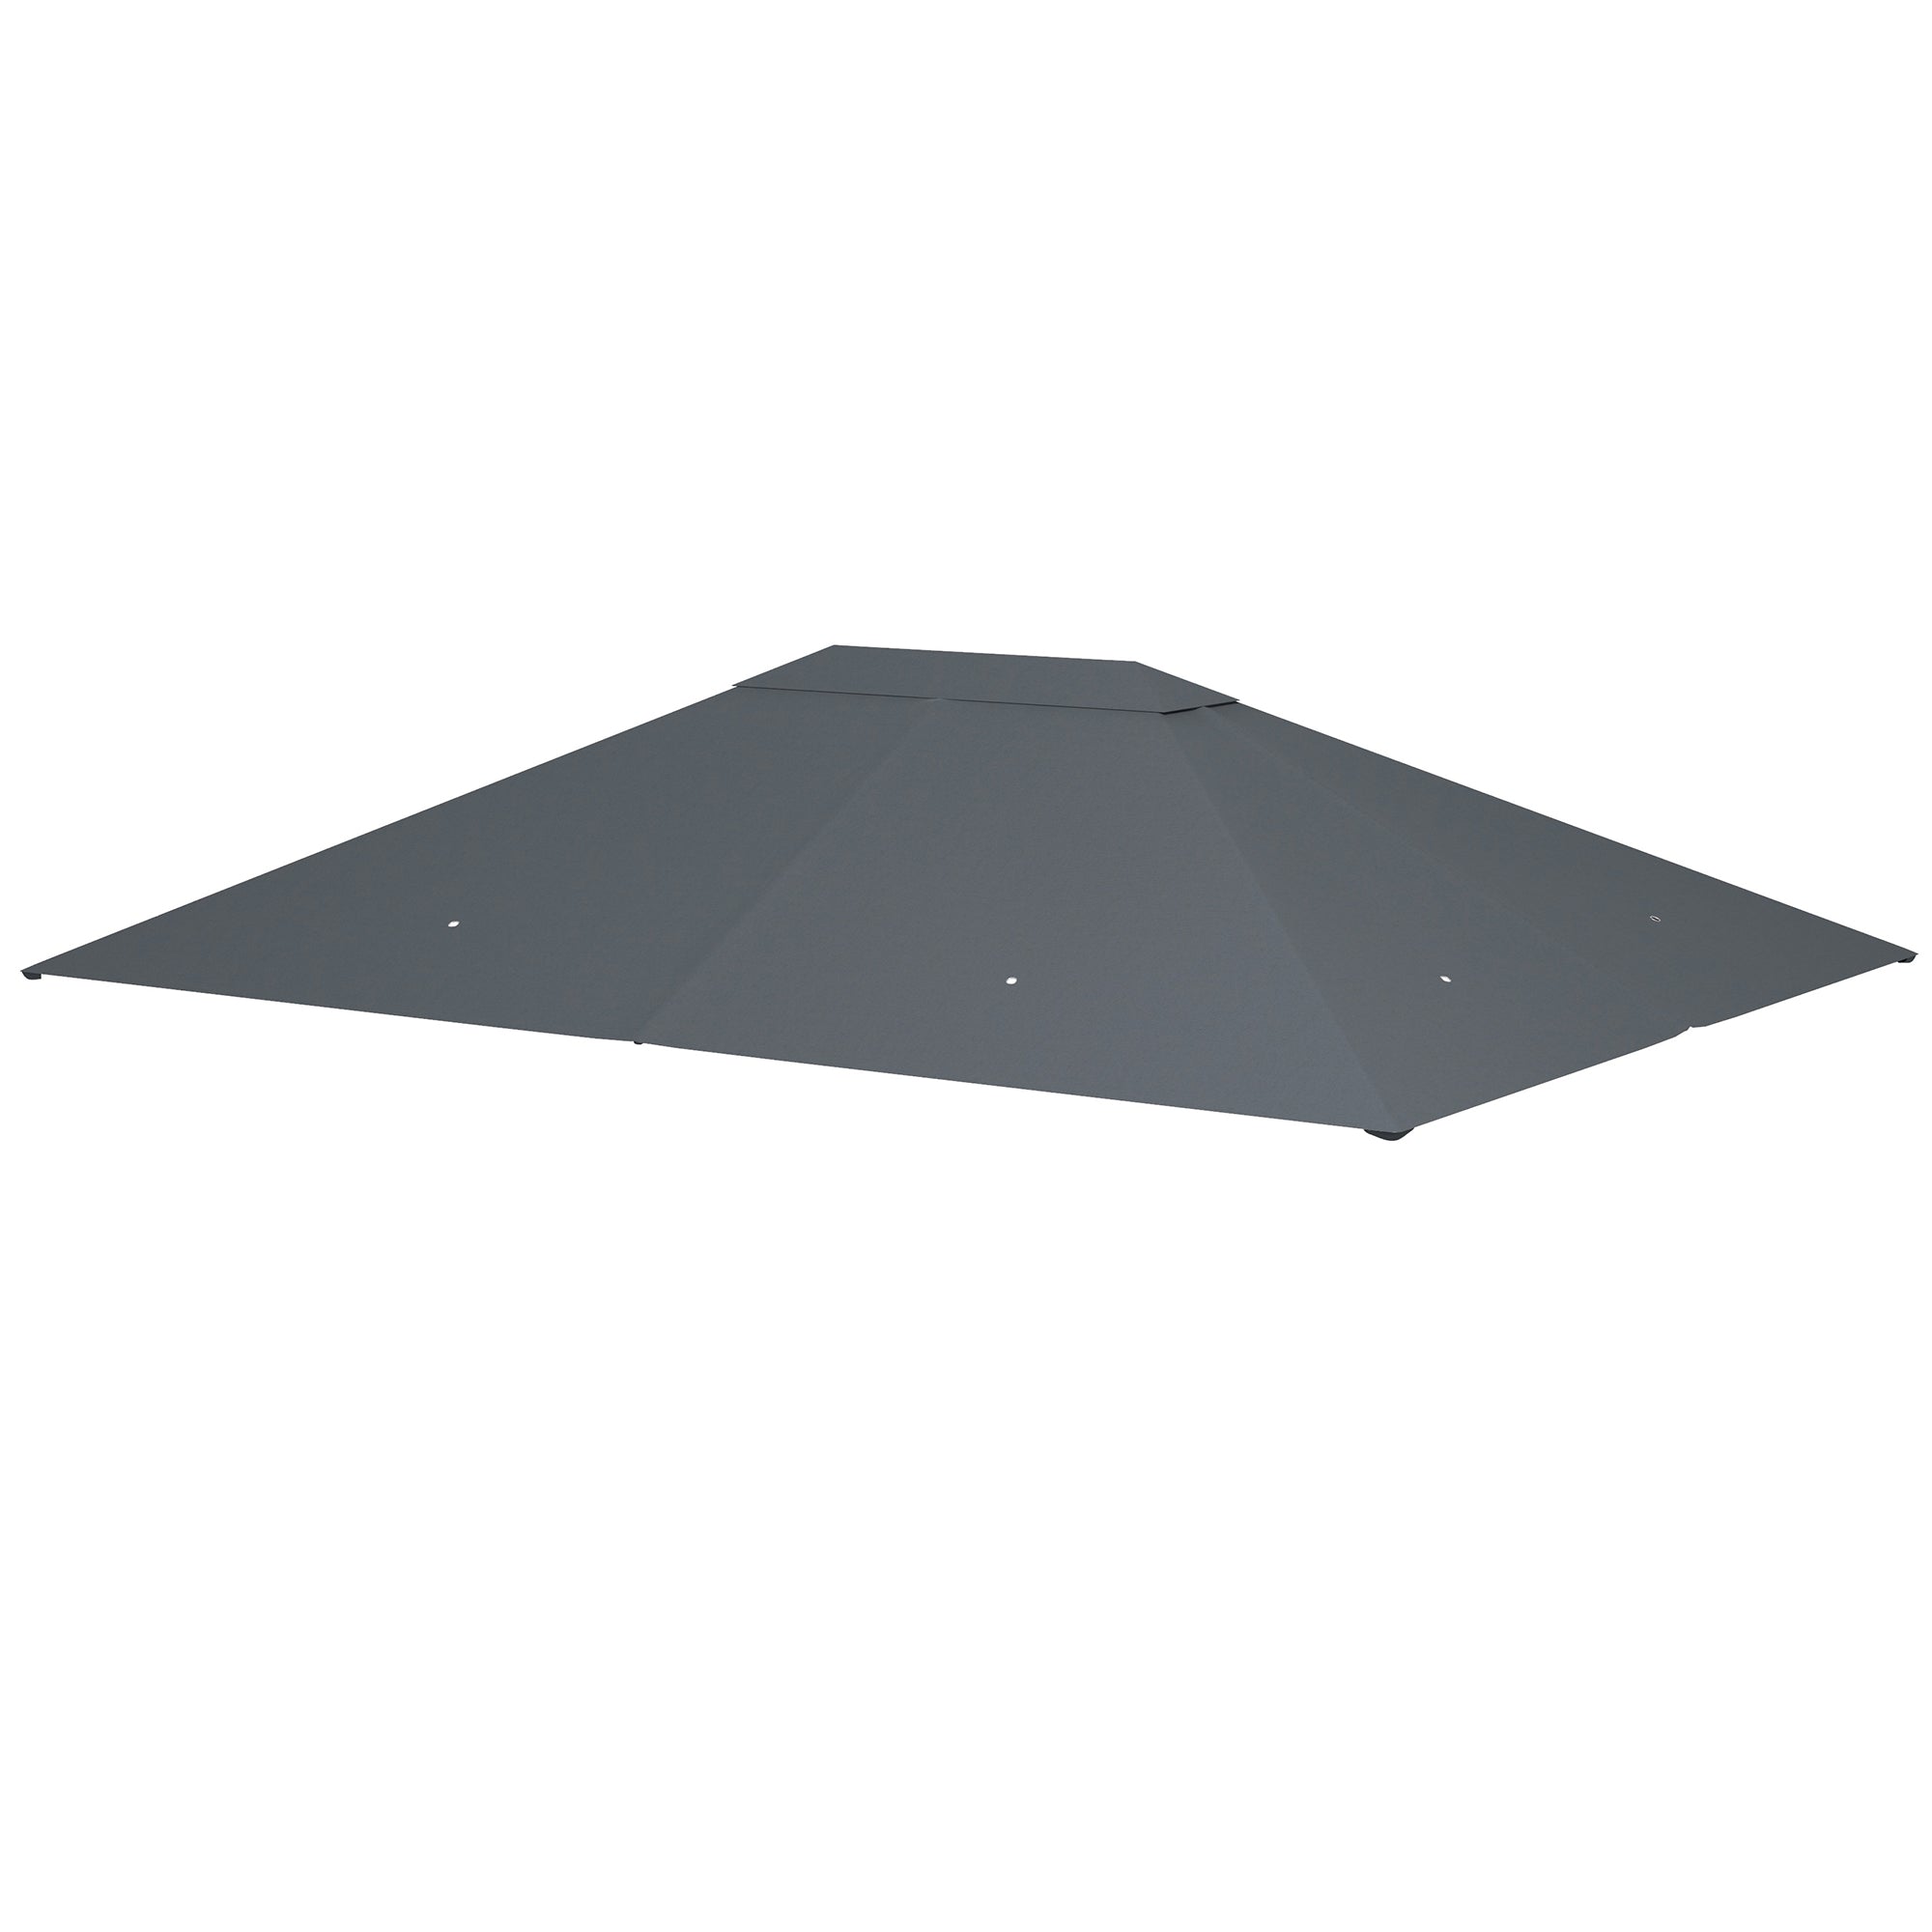 3 x 4m Gazebo Canopy Replacement Cover, Gazebo Roof Replacement (TOP COVER ONLY), Dark Grey-0